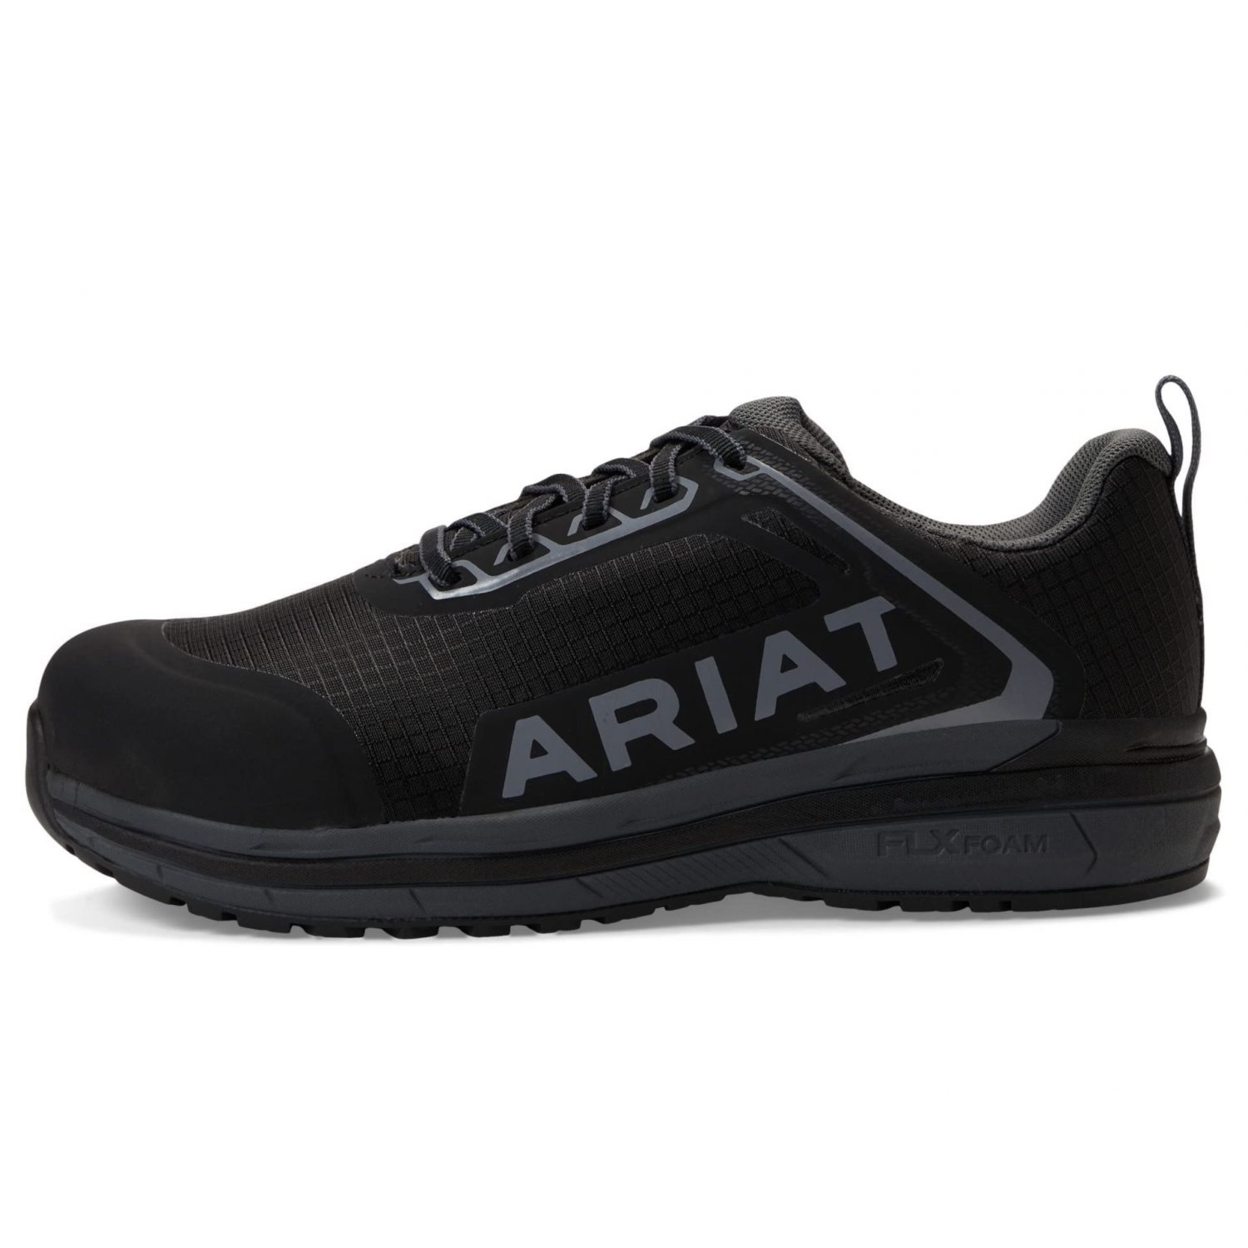 ARIAT Women's Outpace Composite Toe Safety Shoe Fire ONE SIZE BLACK - BLACK, 8.5 Wide